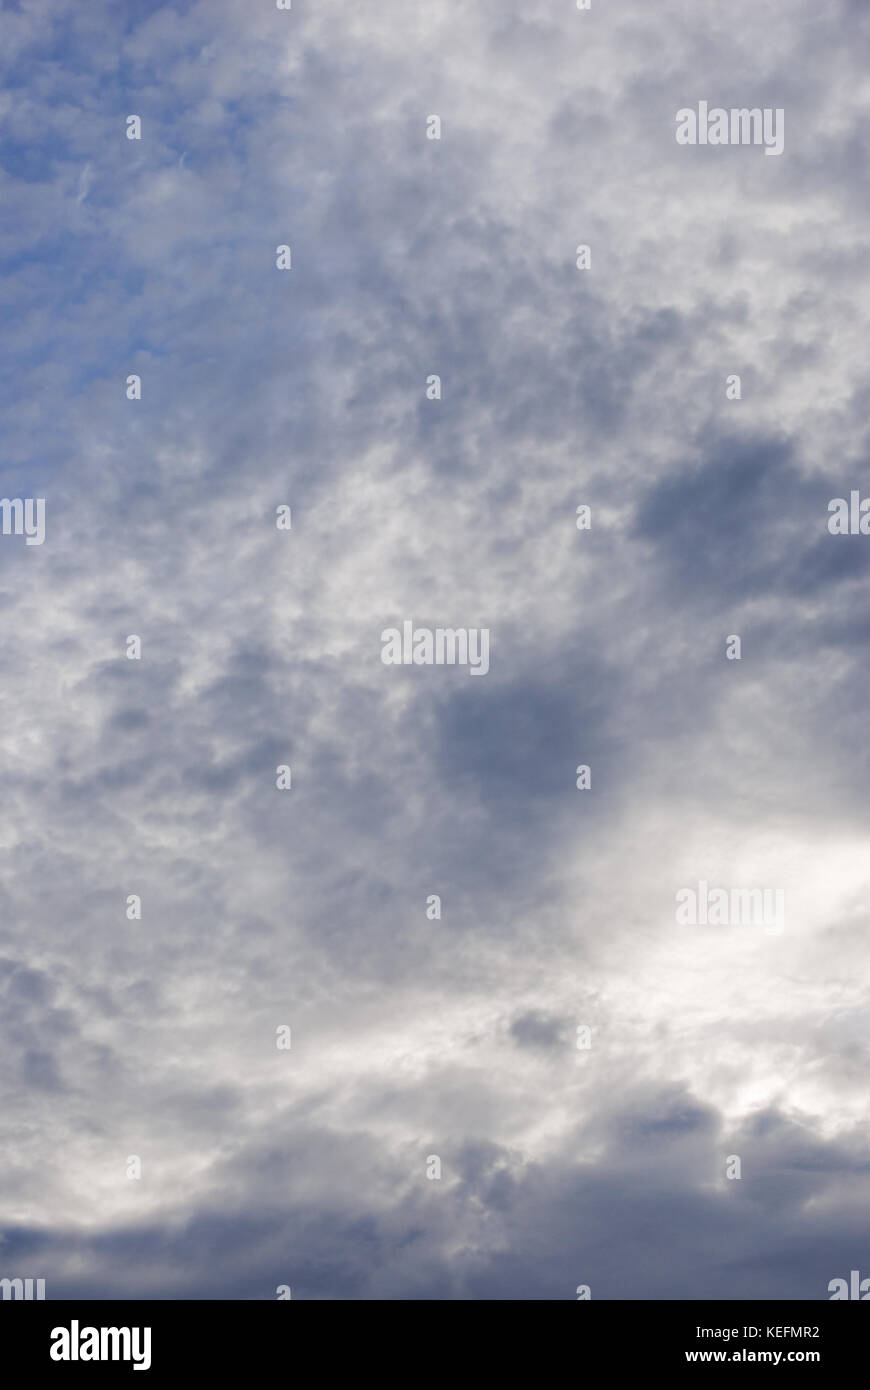 Blue sky with dense white and grey cloud cover. Stock Photo